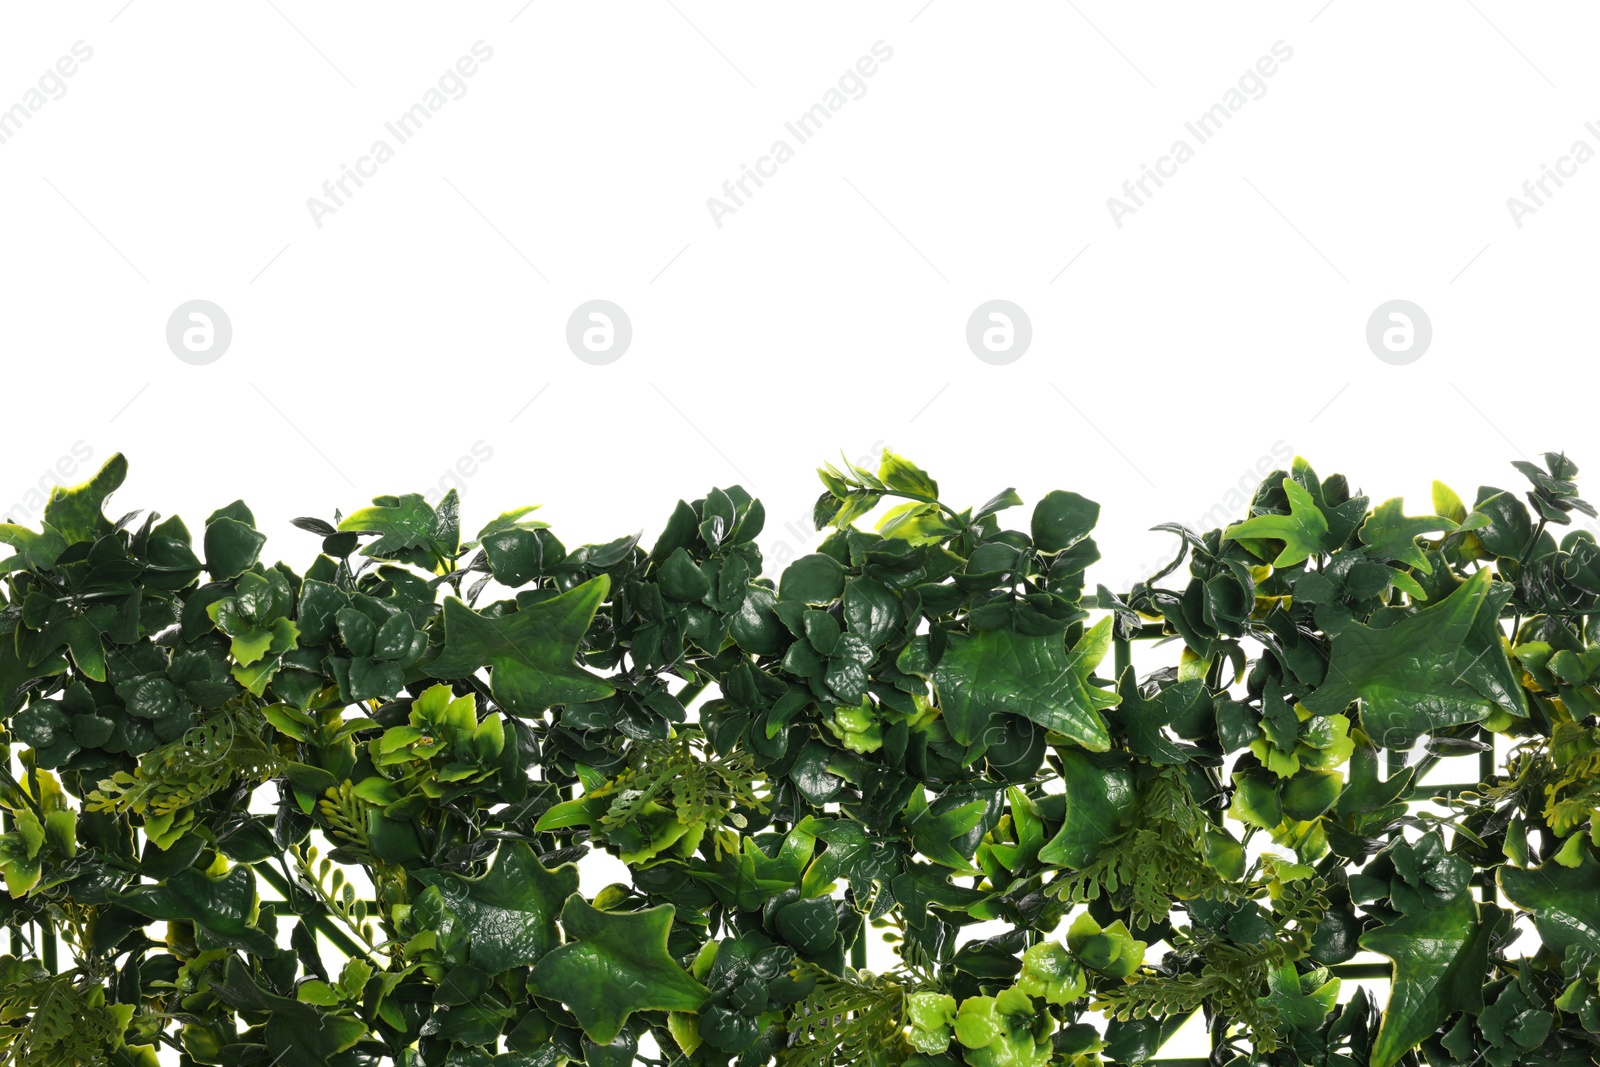 Photo of Green artificial plants with lush leaves isolated on white